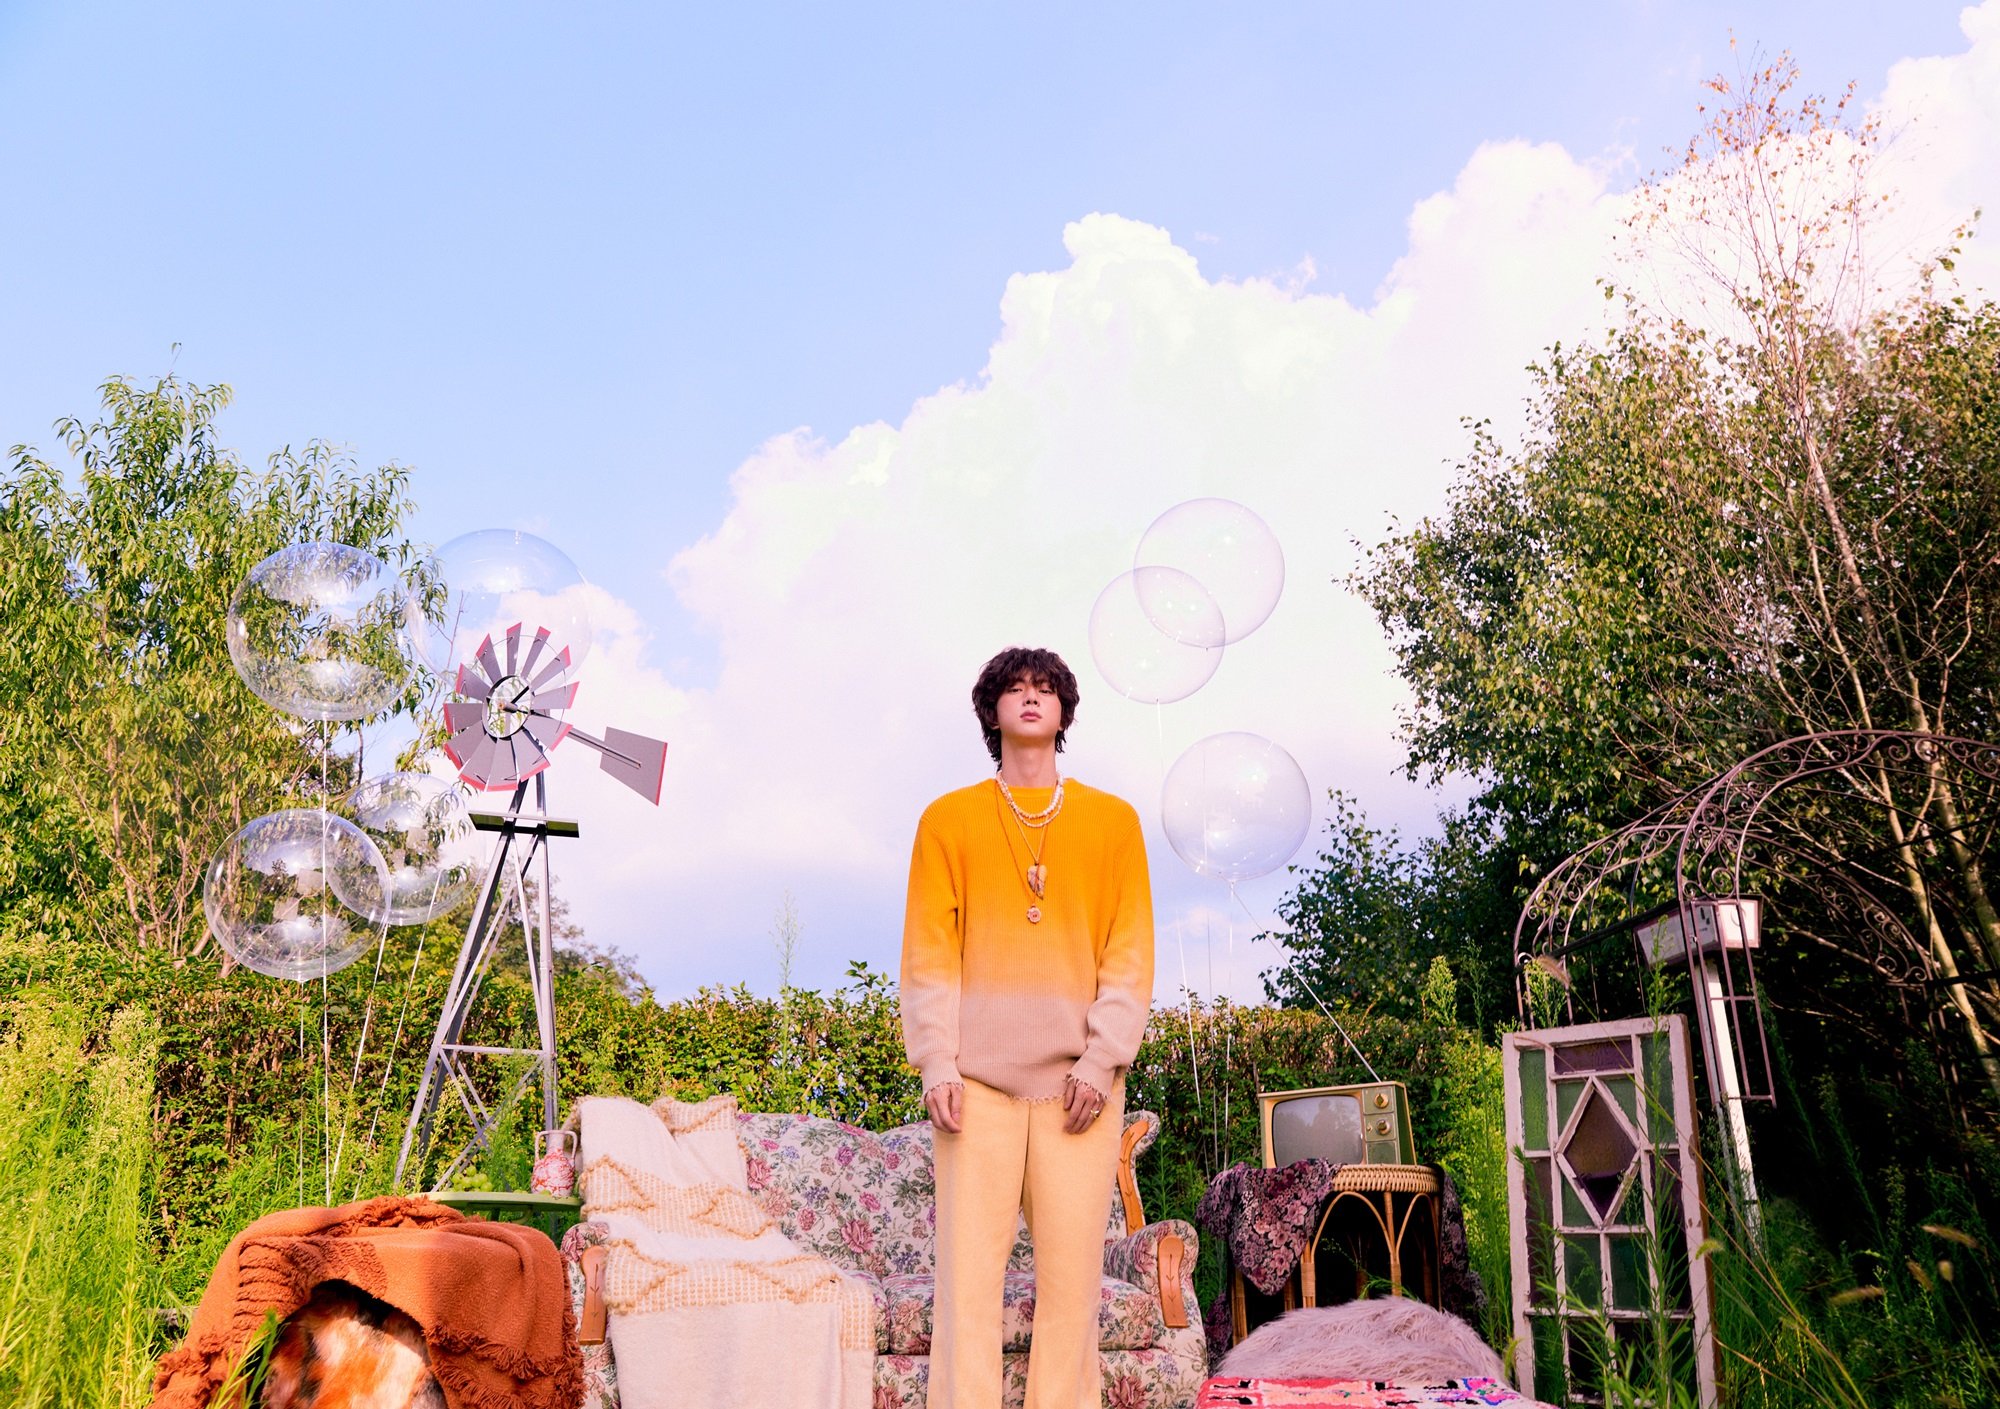 Jin of BTS stands outside in front of a floral couch and vintage TV